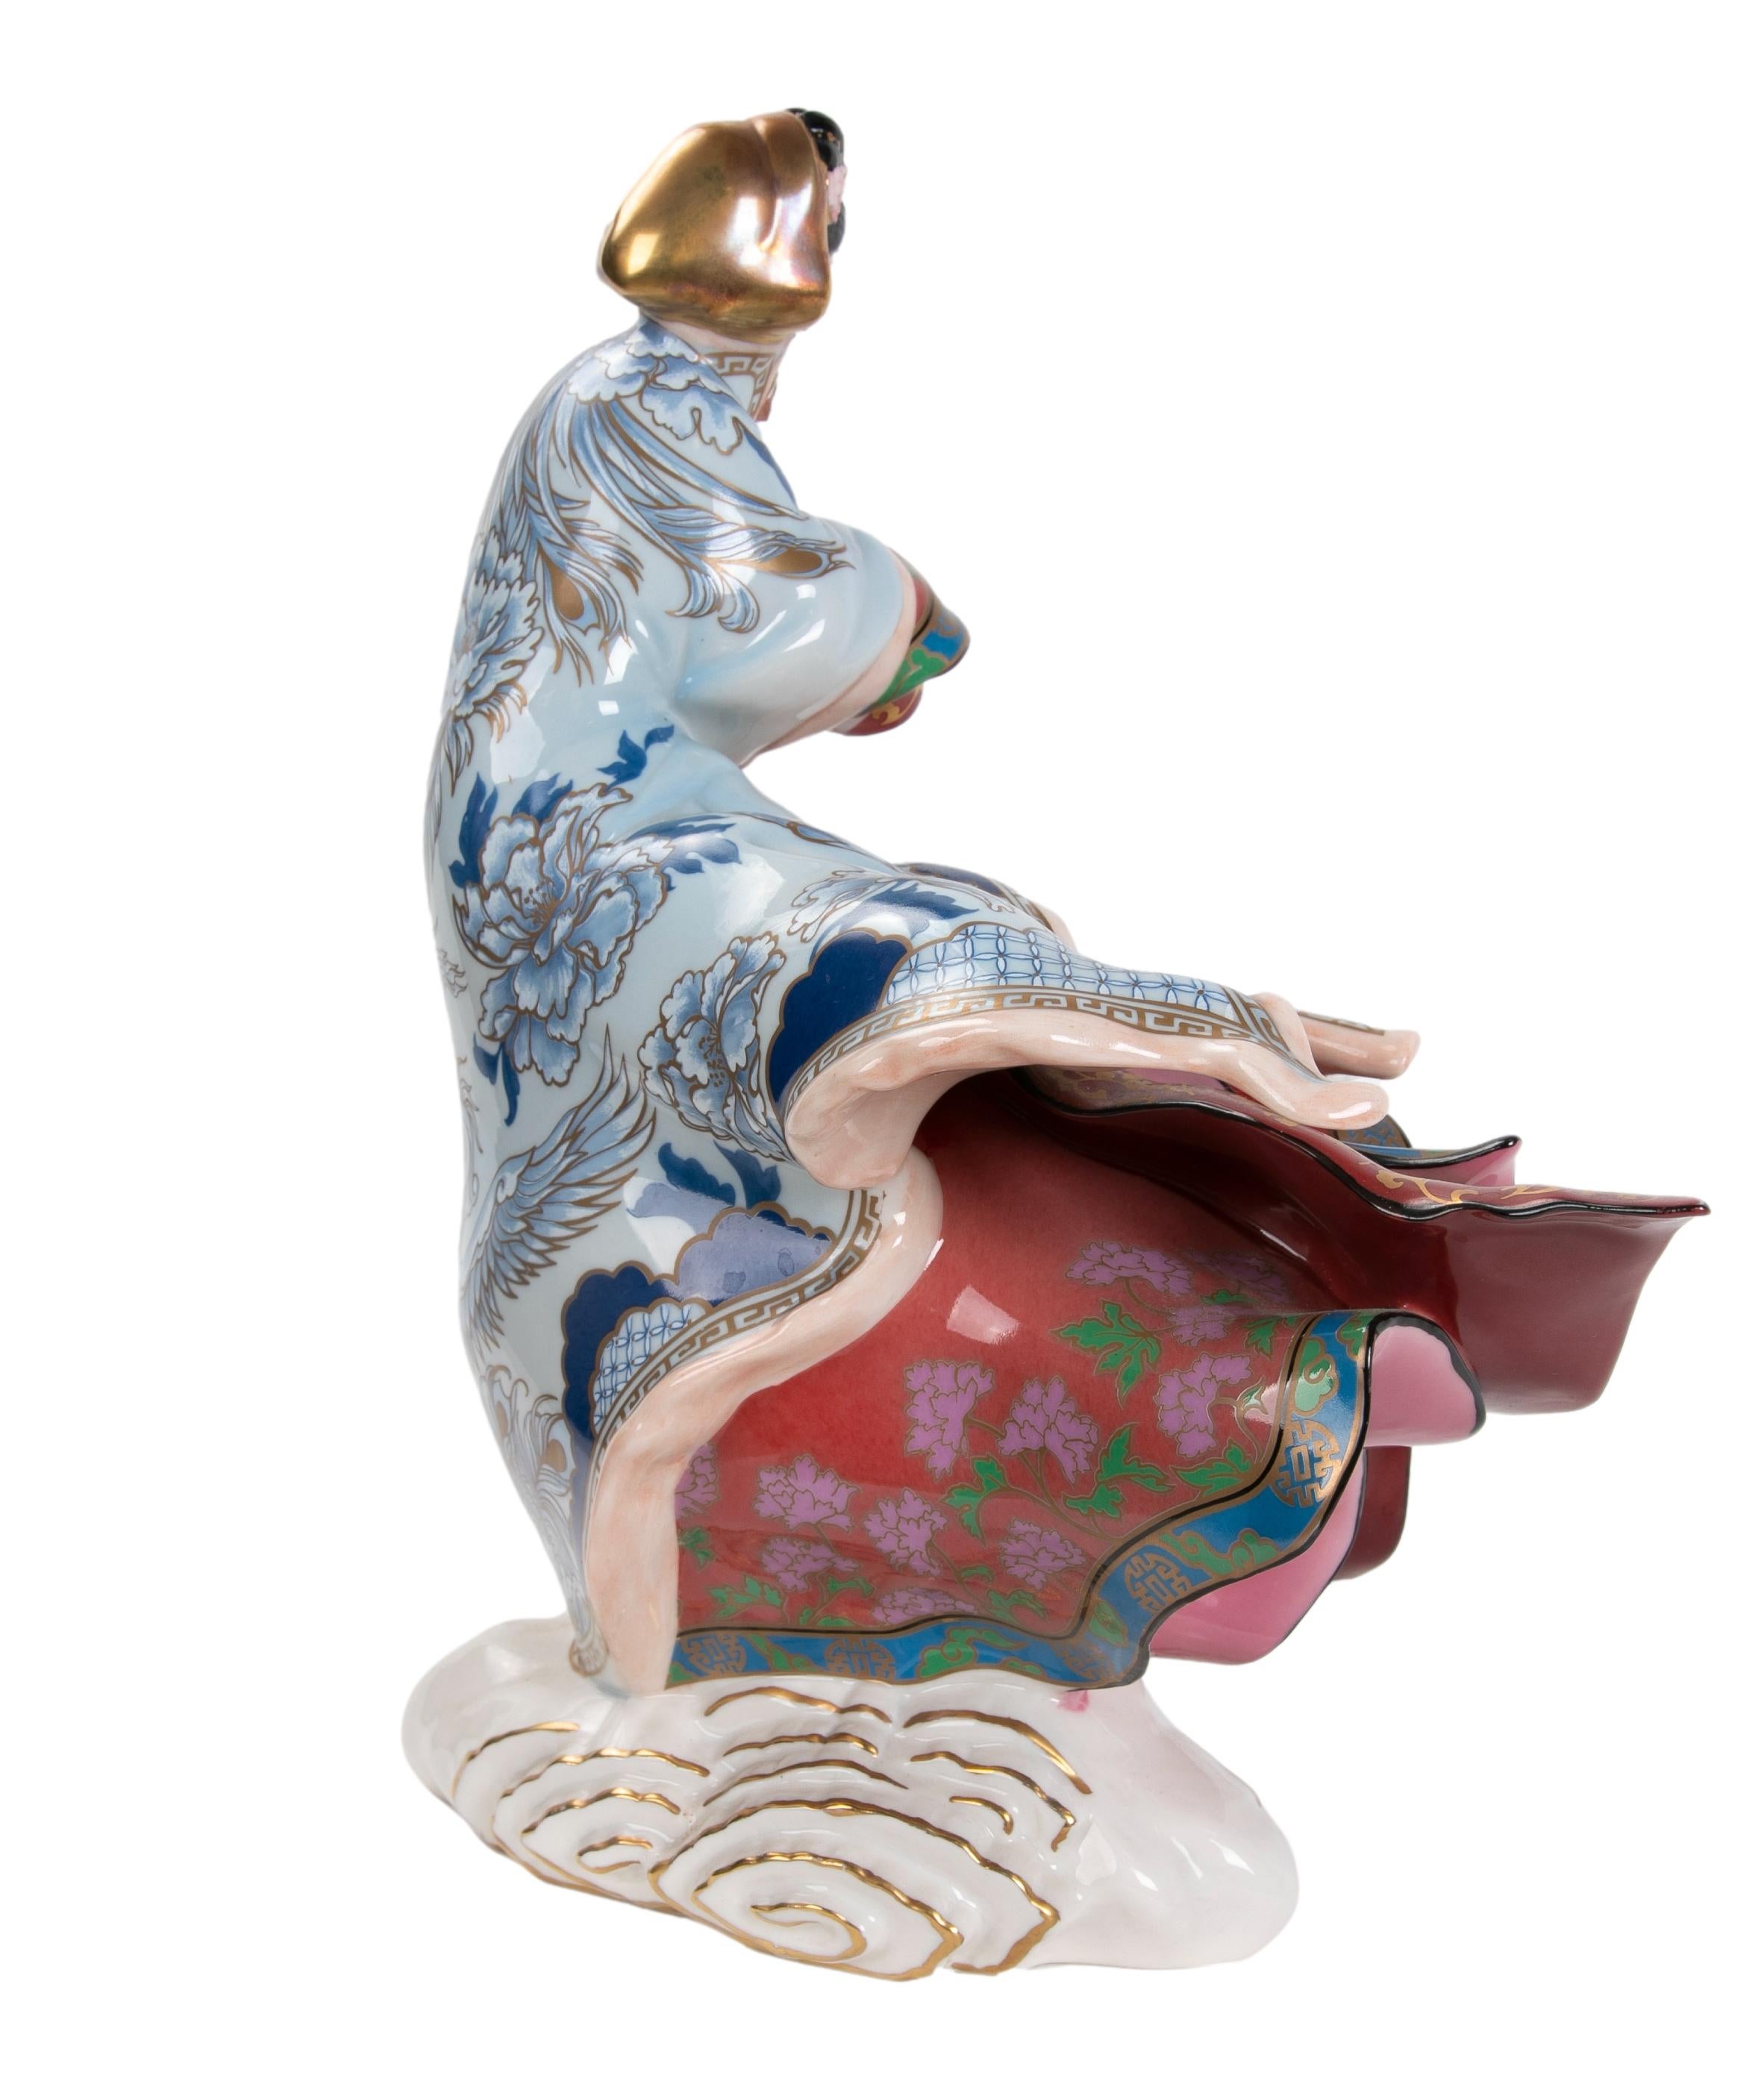 1980s Porcelain sculpture of a Japanese woman, manufactured by The Franklin Mint
Limited and numbered edition no M 7256, as title Empress of The Snow.